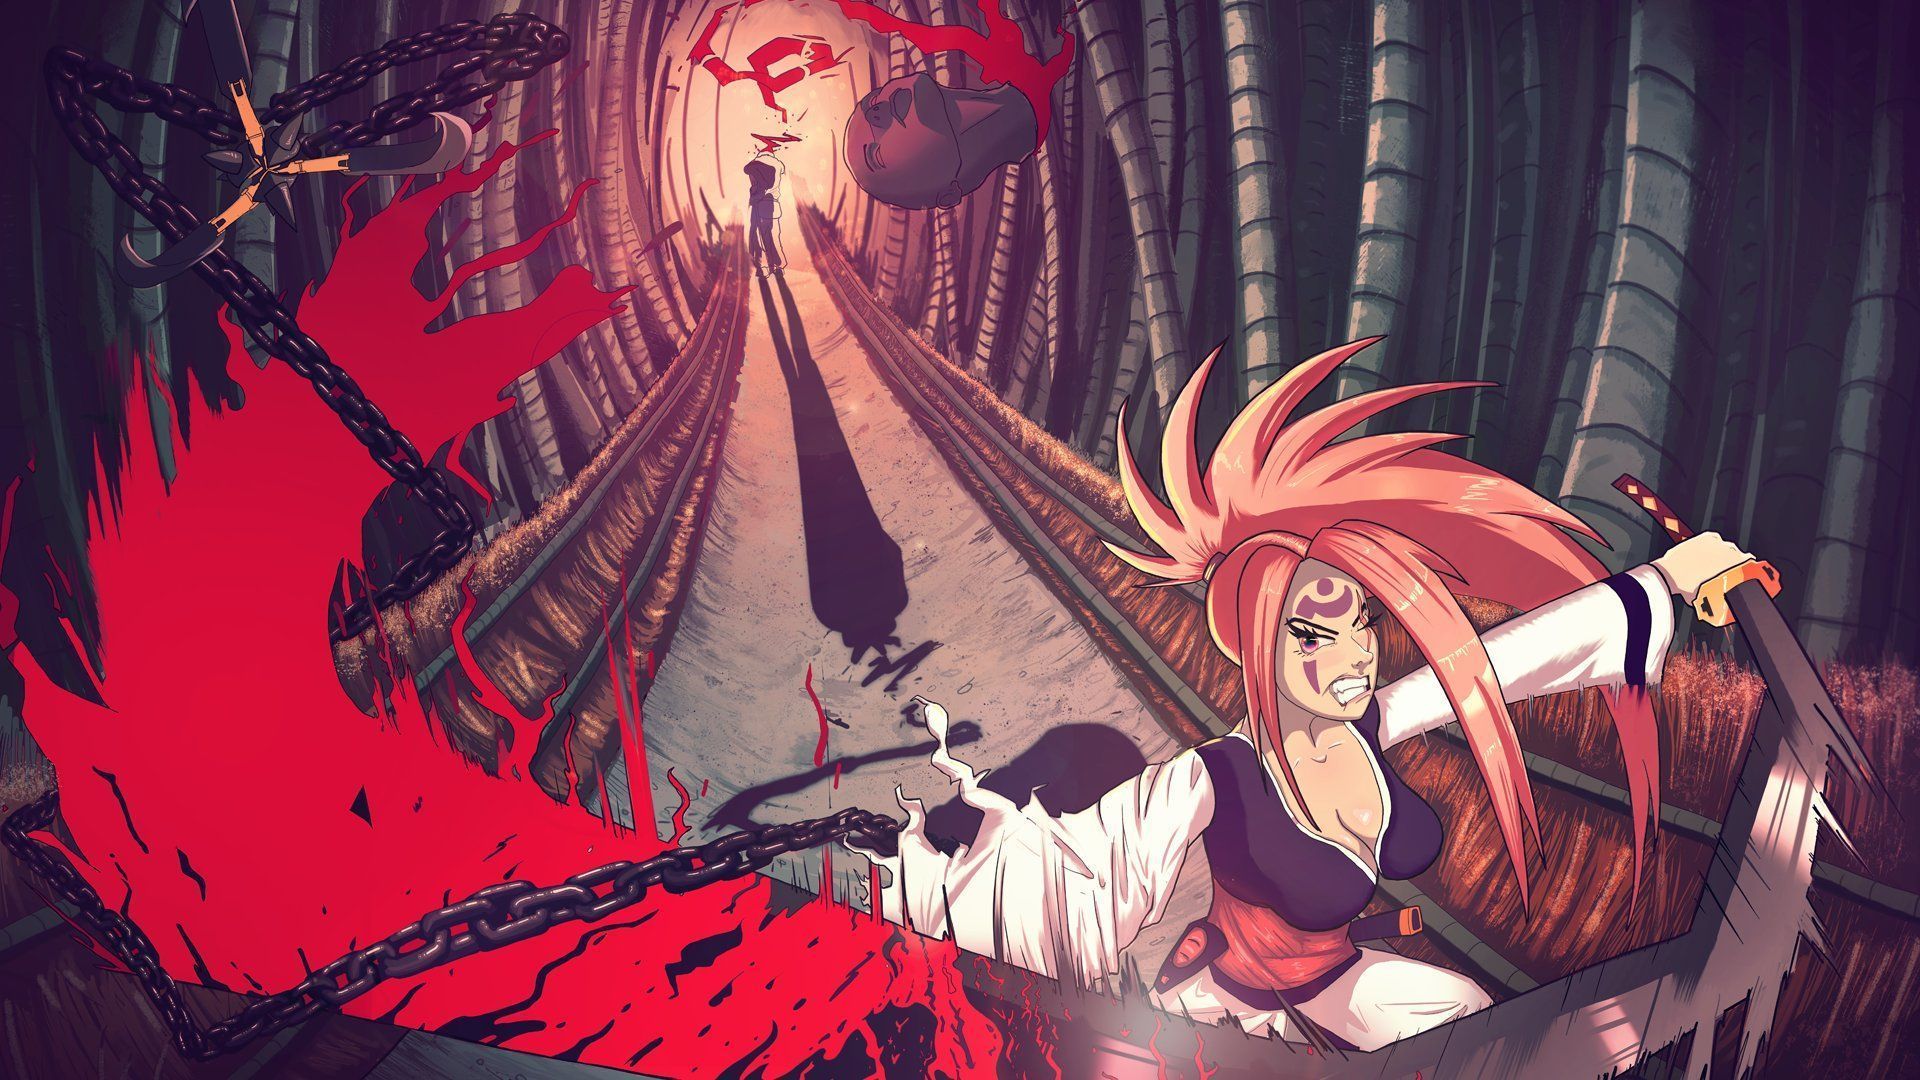 Baiken Guilty Gear wallpapers for desktop download free Baiken Guilty  Gear pictures and backgrounds for PC  moborg